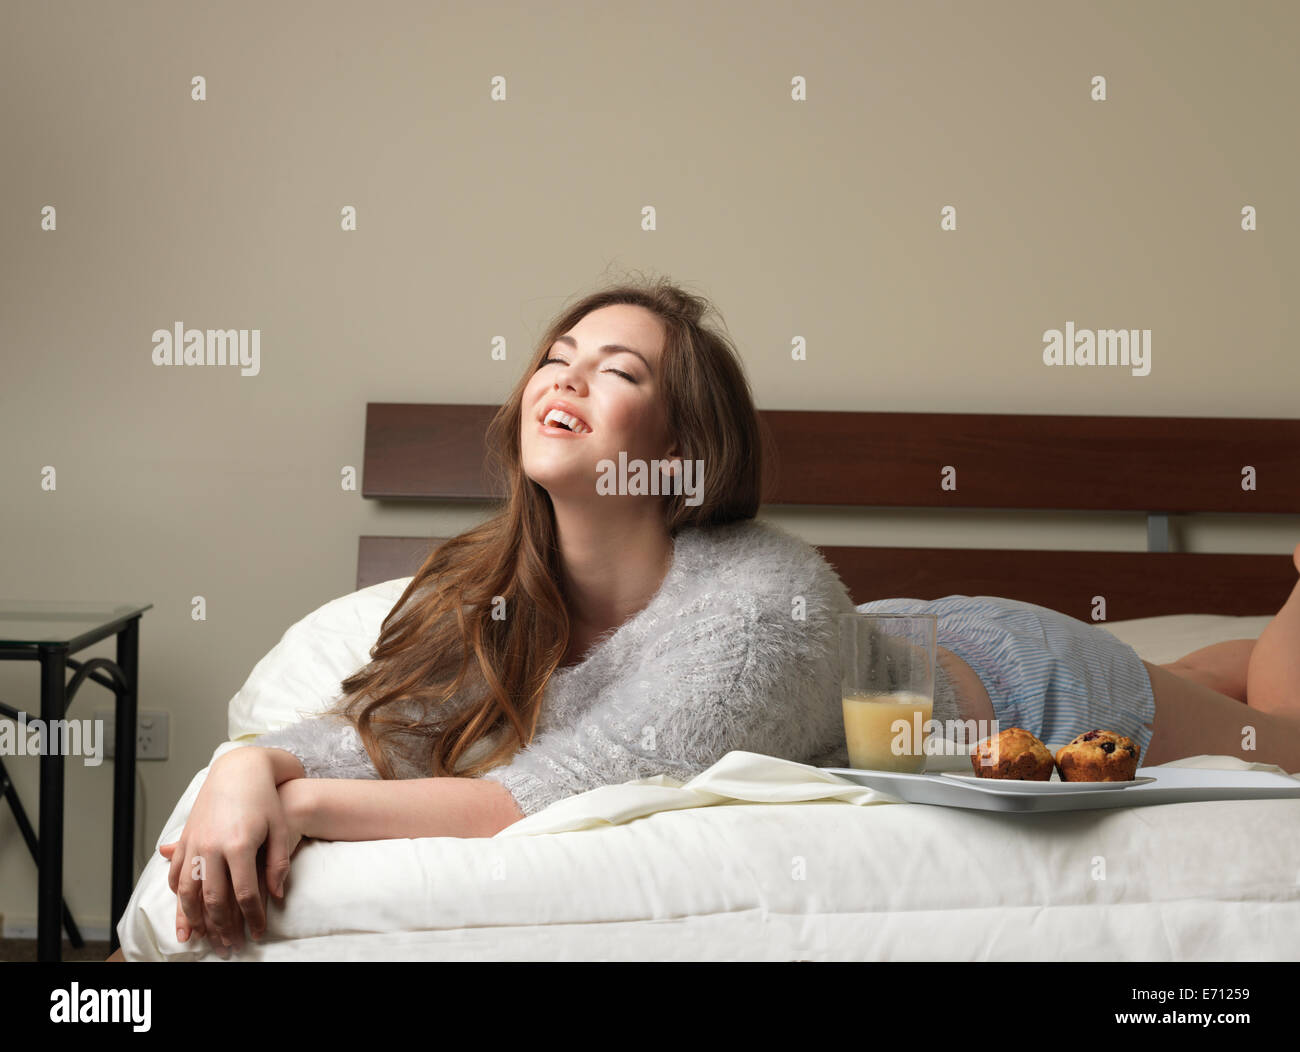 Beautiful young woman laughing on hotel bed Stock Photo